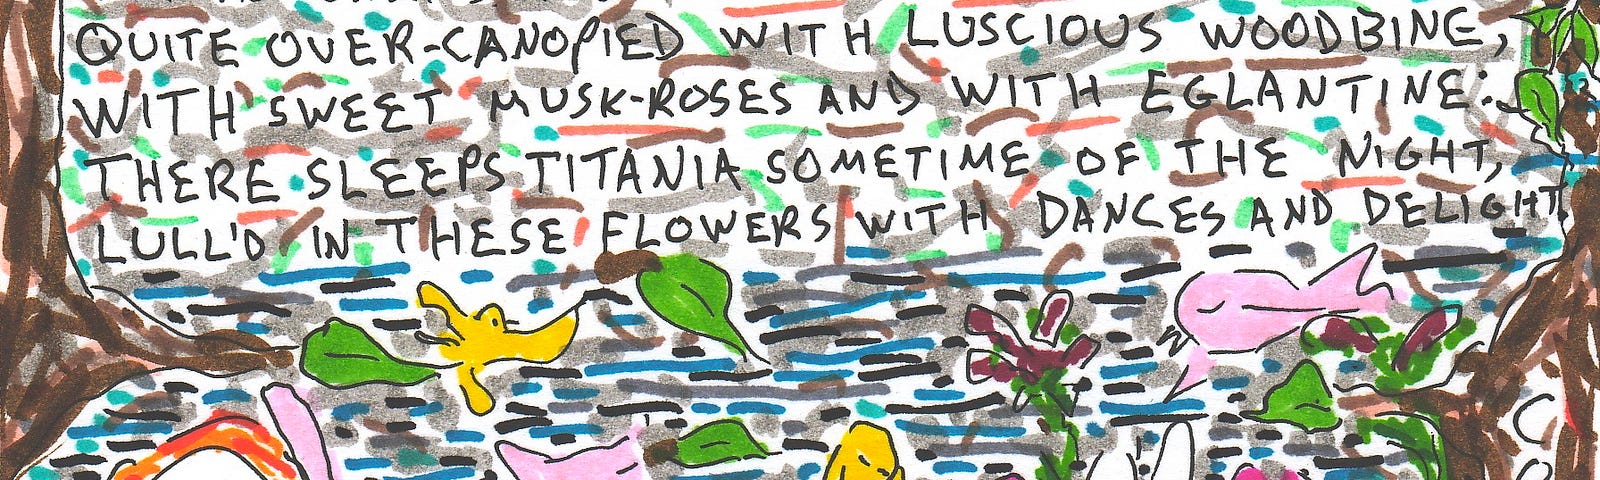 A doodle cartoon of a woman sleeping by the bank of a river surrounded by birds, cat, bunnies, and flowers, Woven among leaves above the figure are words from Shakespeare’s A Midsummer Night’s Dream, “I know a bank where the wild thyme blows, Where oxlips and the nodding violet grows, Quite over-canopied with luscious woodbine, With sweet musk-roses and with eglantine: There sleeps Titania sometime of the night, Lull’d in these flowers with dances and delight…” Art by Doodleslice aka David Cohen